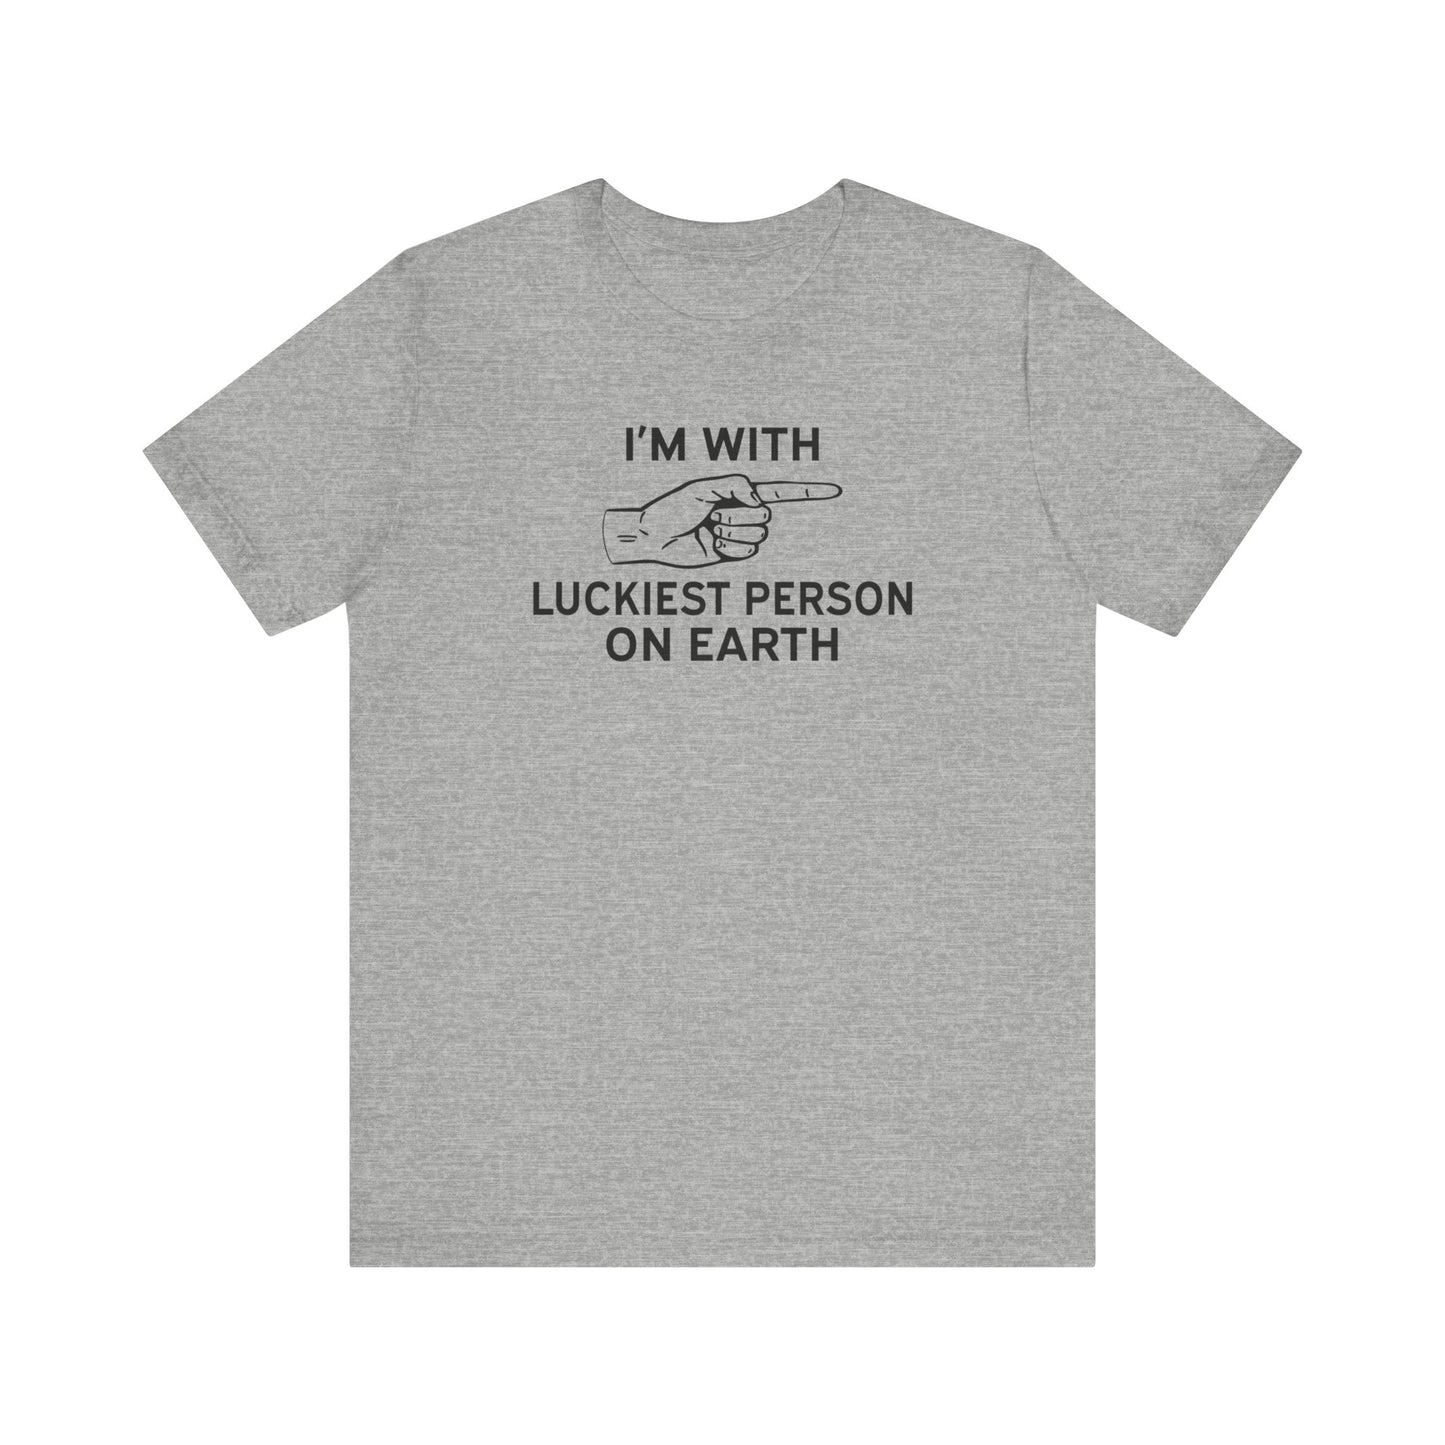 I'm With Luckiest Person on Earth - Unisex T-Shirt